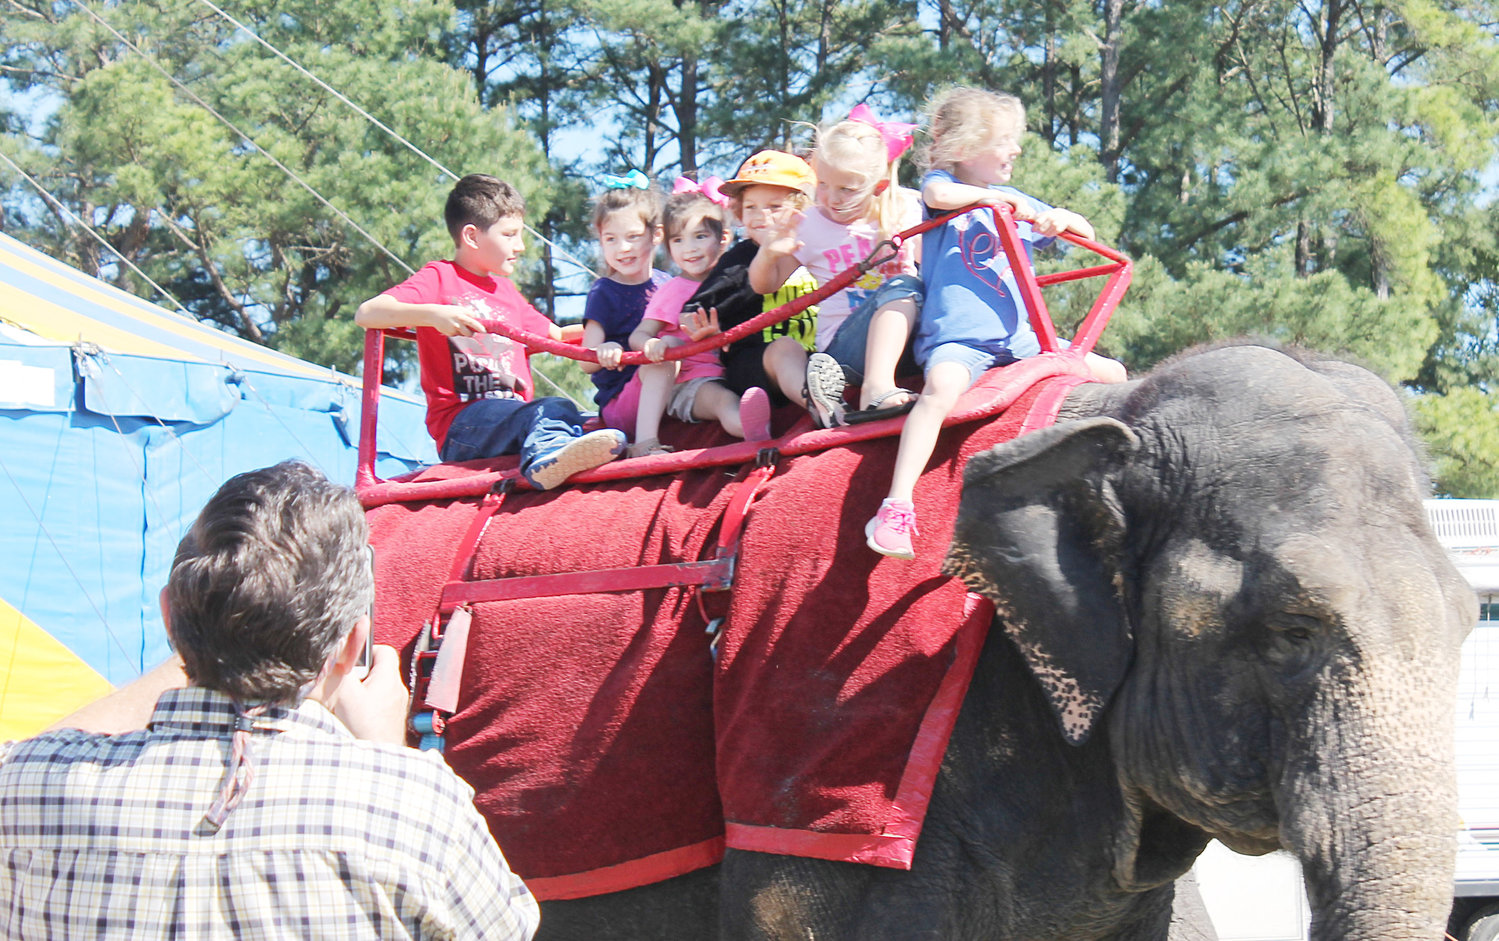 A group of children get the chance to see the world from a different angle atop the back of one of the pachyderms in Friday’s circus at the Mineola Civic Center.